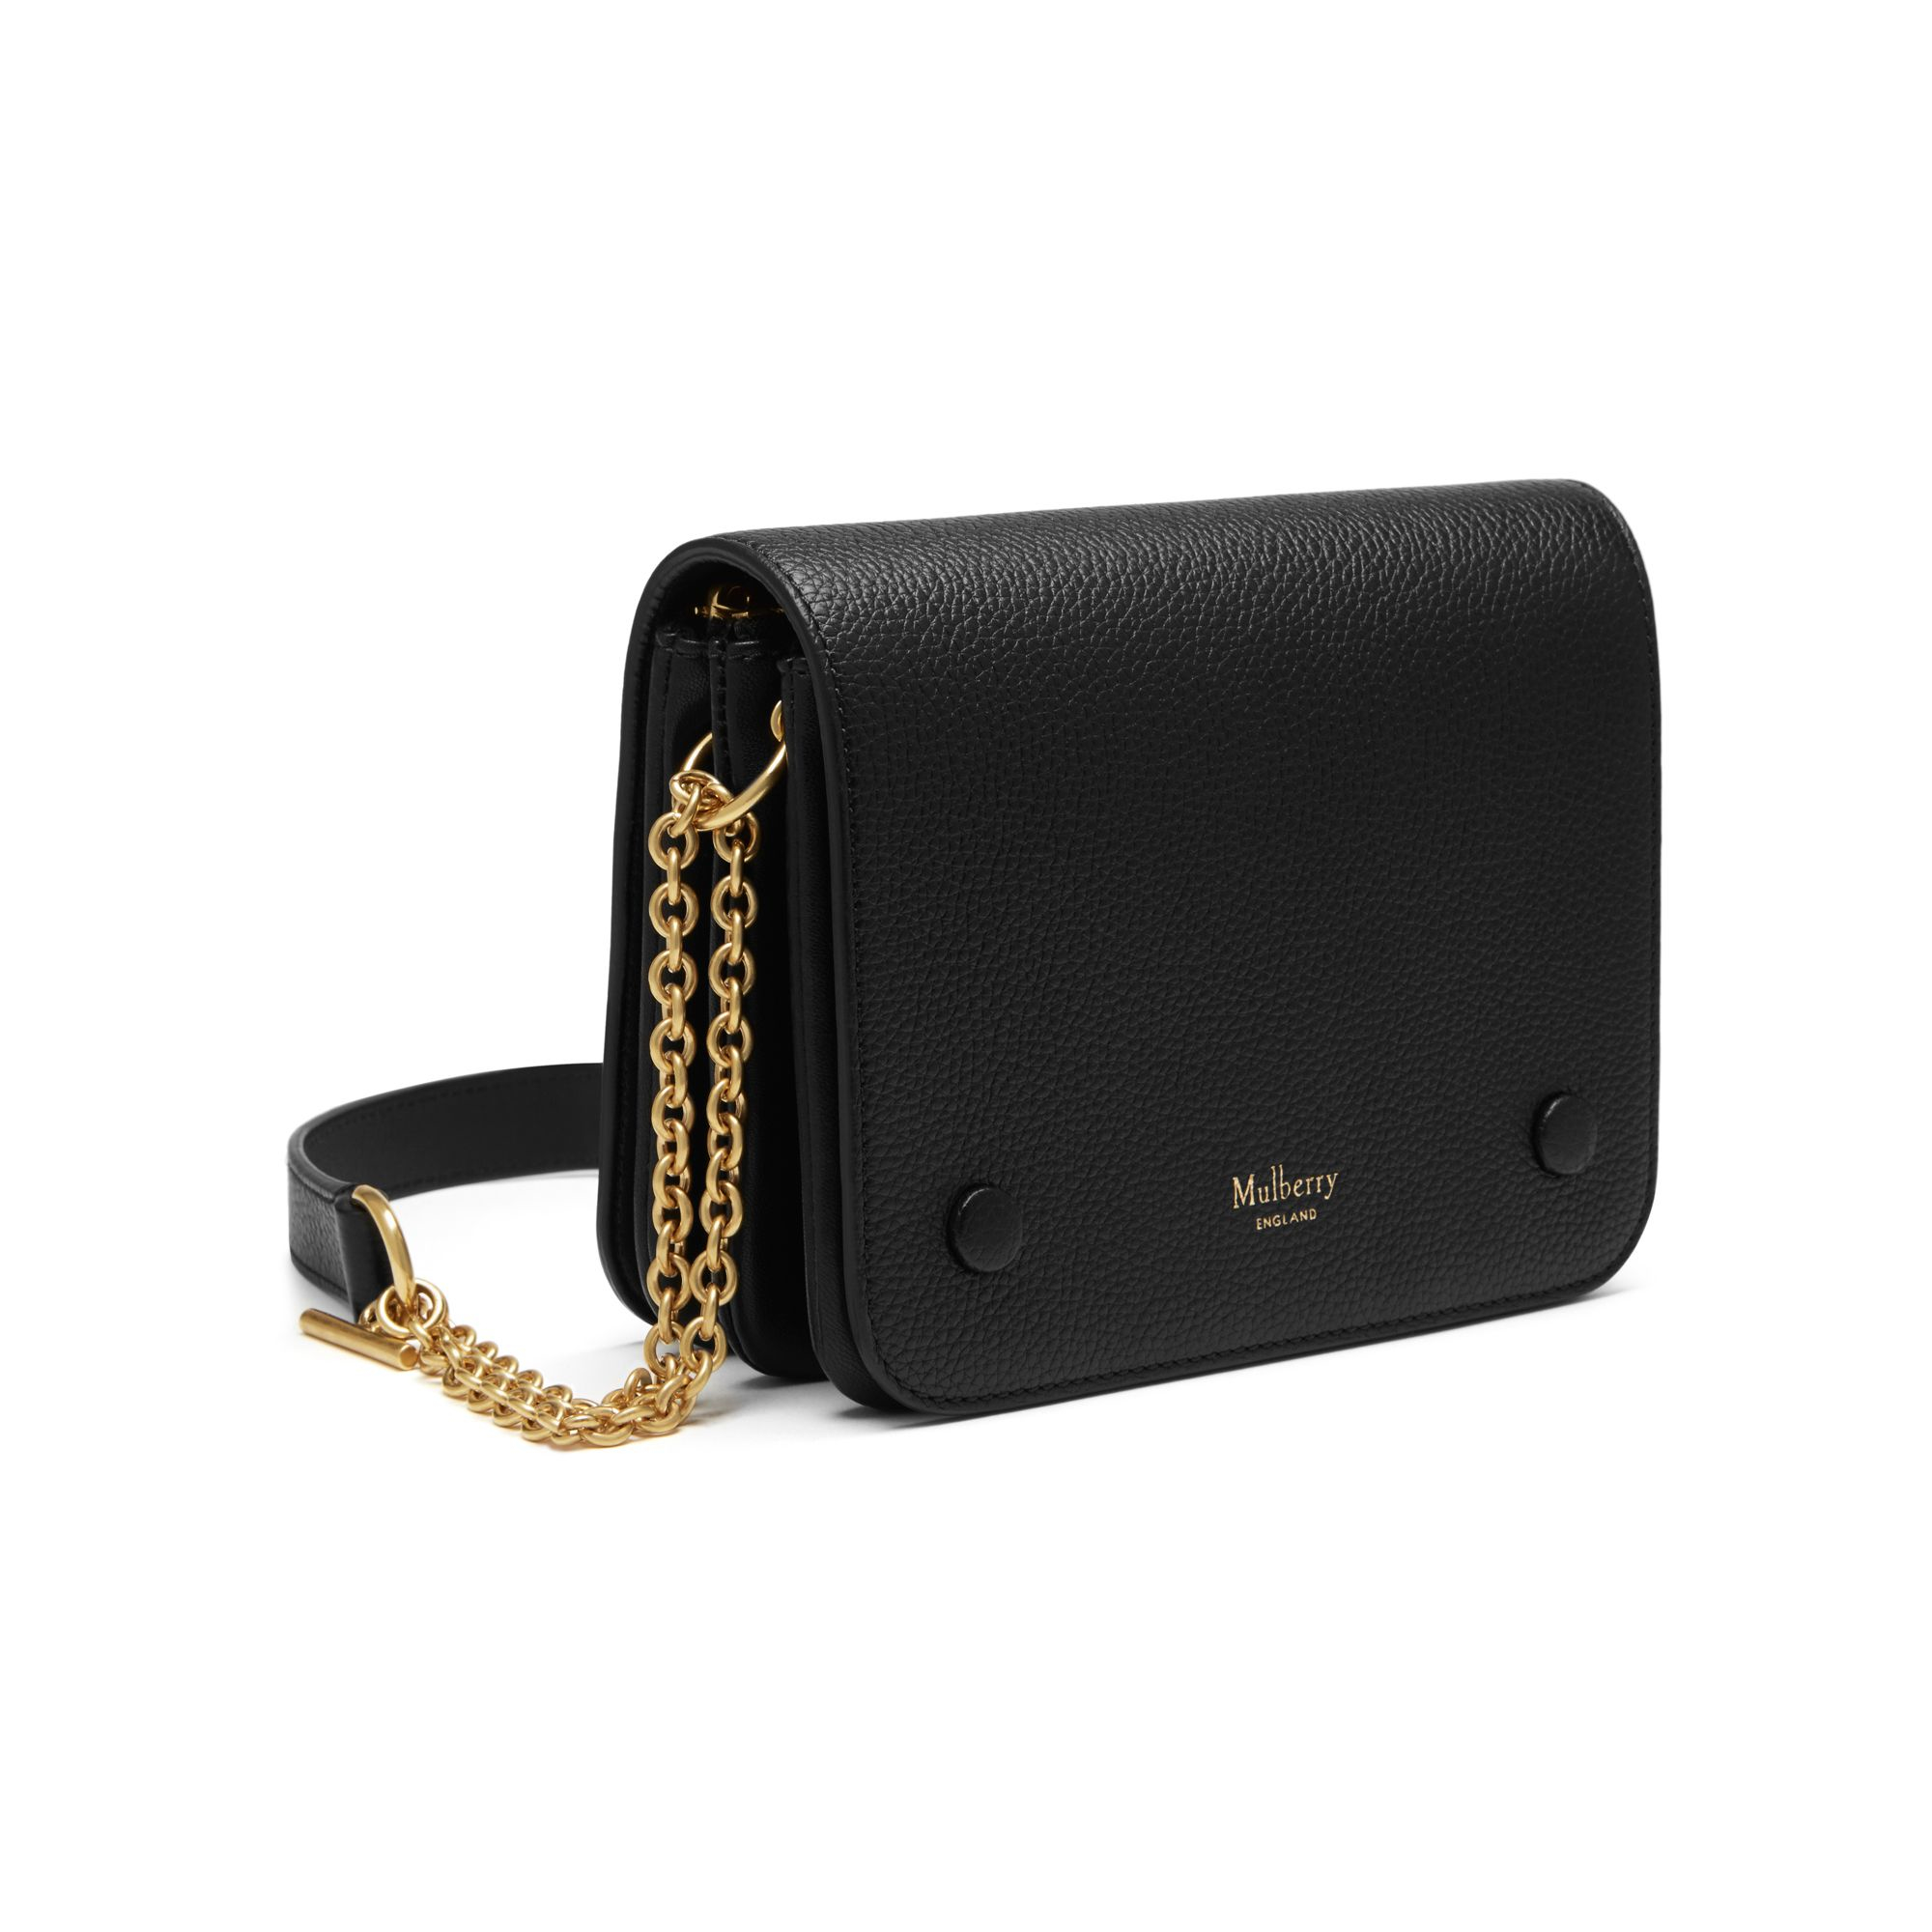 Mulberry Clifton Leather Shoulder Bag in Black - Lyst